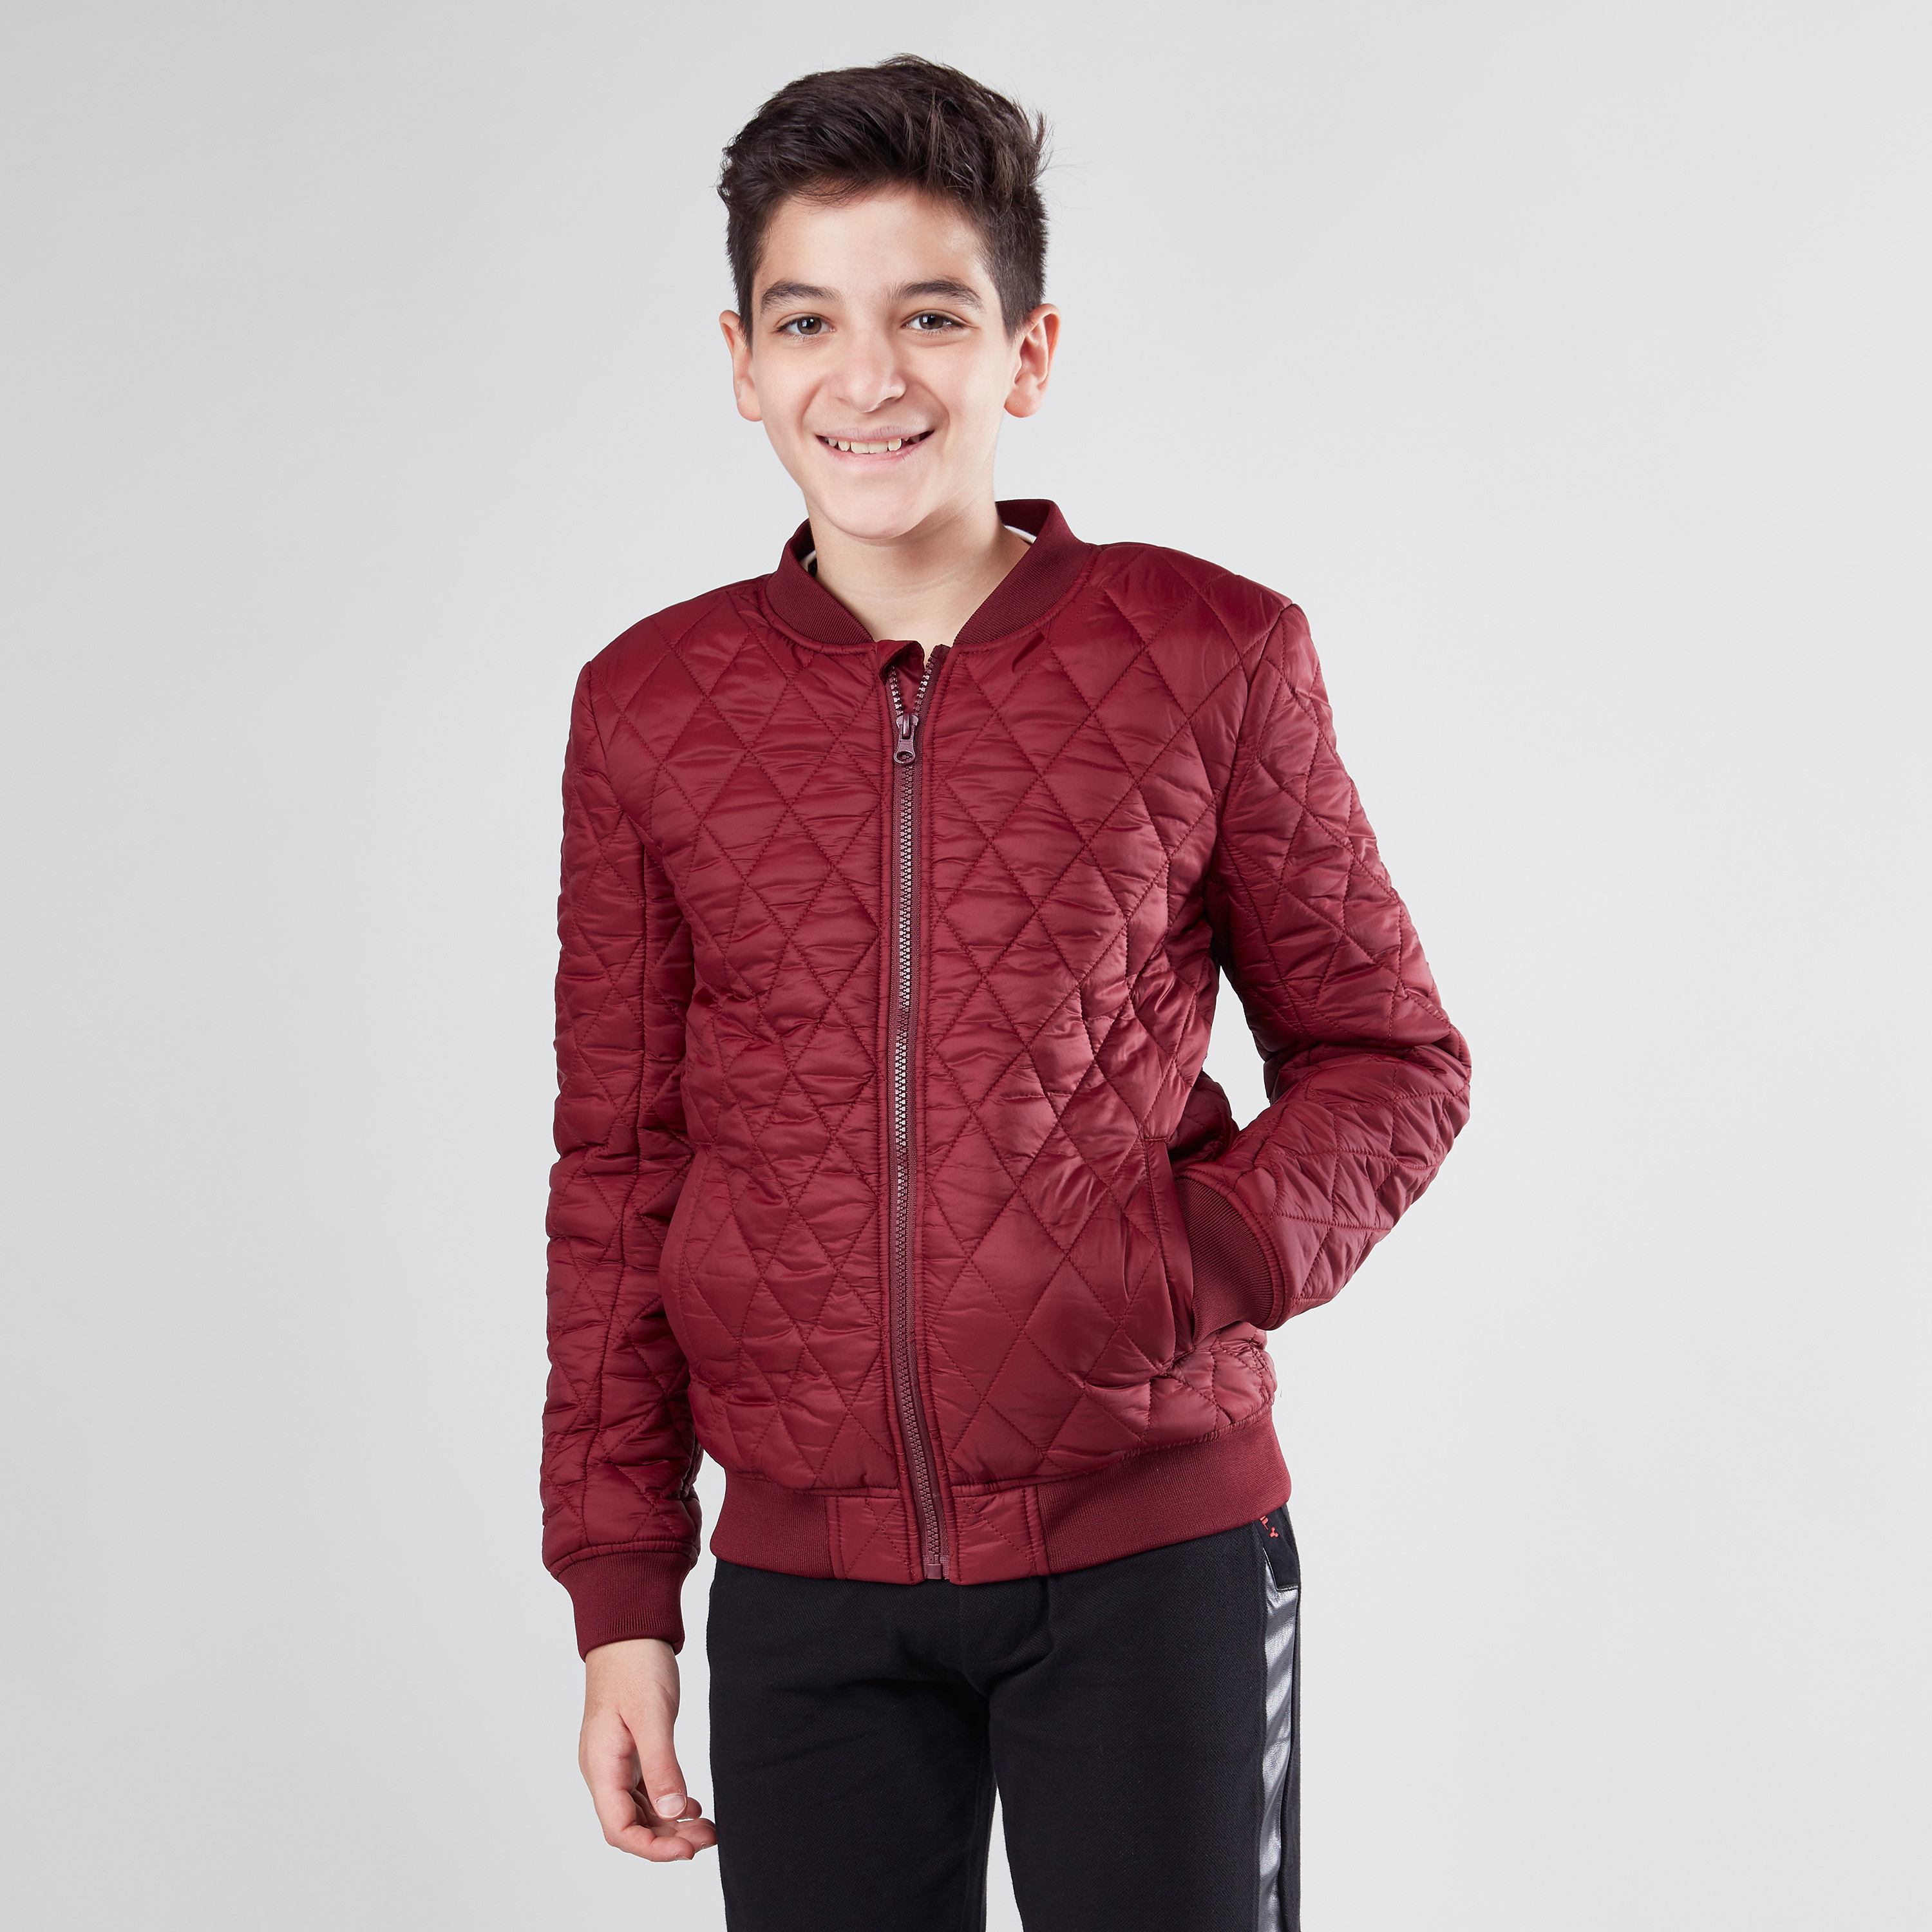 Max Collection kids' bomber jackets, compare prices and buy online